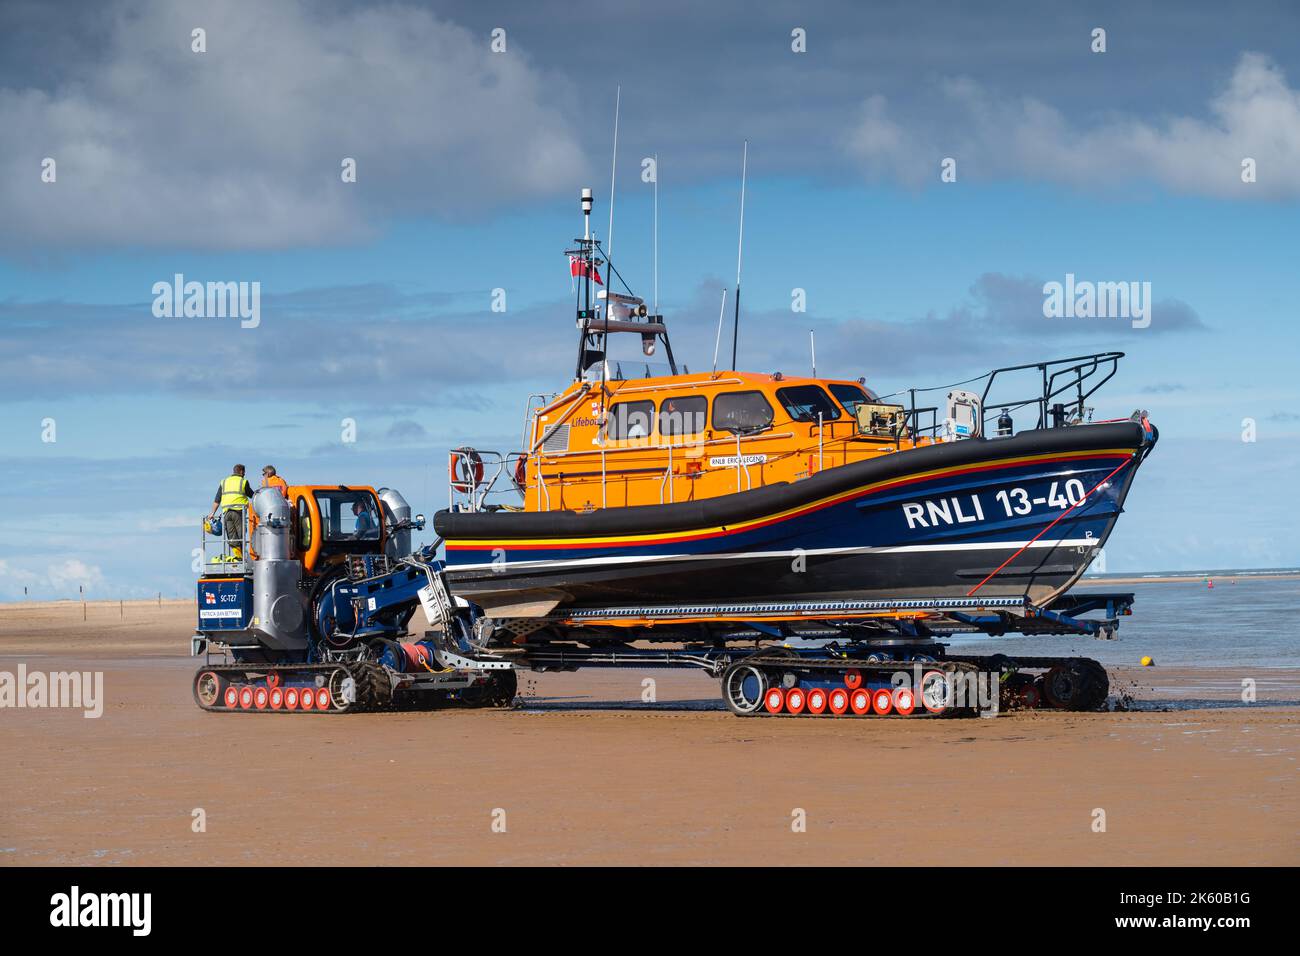 The RNLI Lifeboat stationed in Wells next the Sea, North Norfolk, UK being towed out to sea Stock Photo